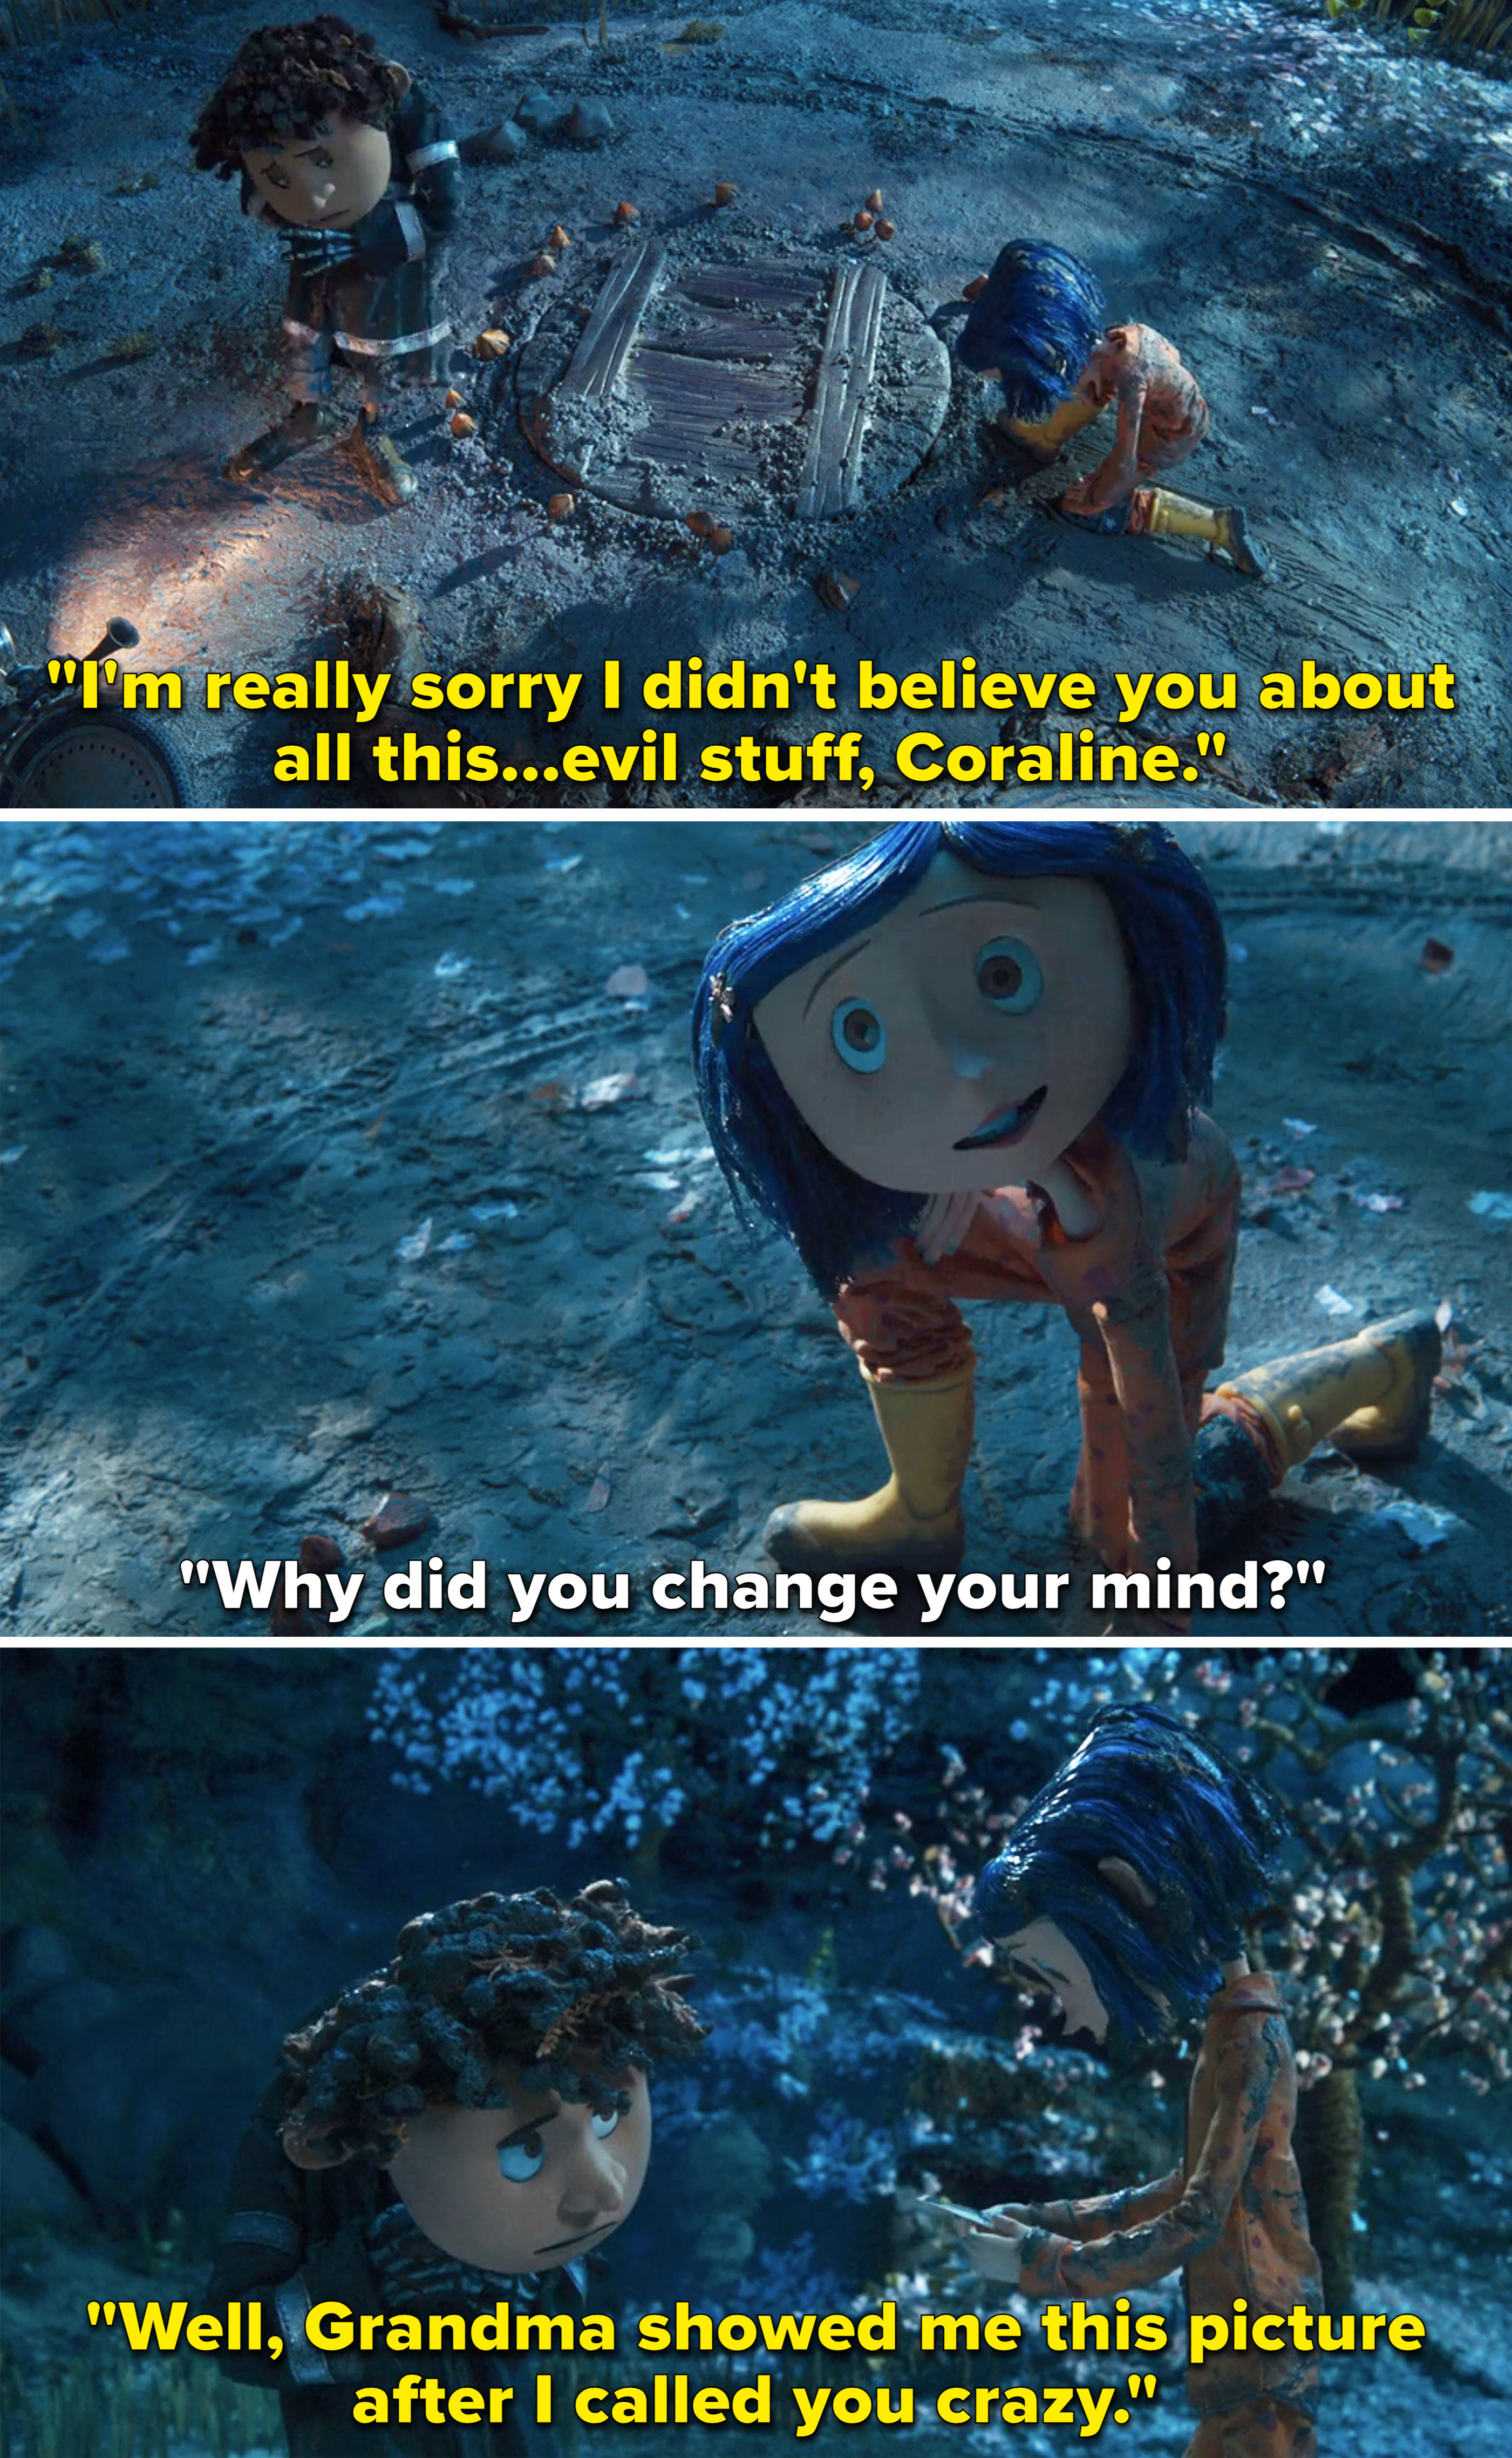 Wylie saying, &quot;I&#x27;m really sorry I didn&#x27;t believe you about all this evil stuff, Coraline&quot;